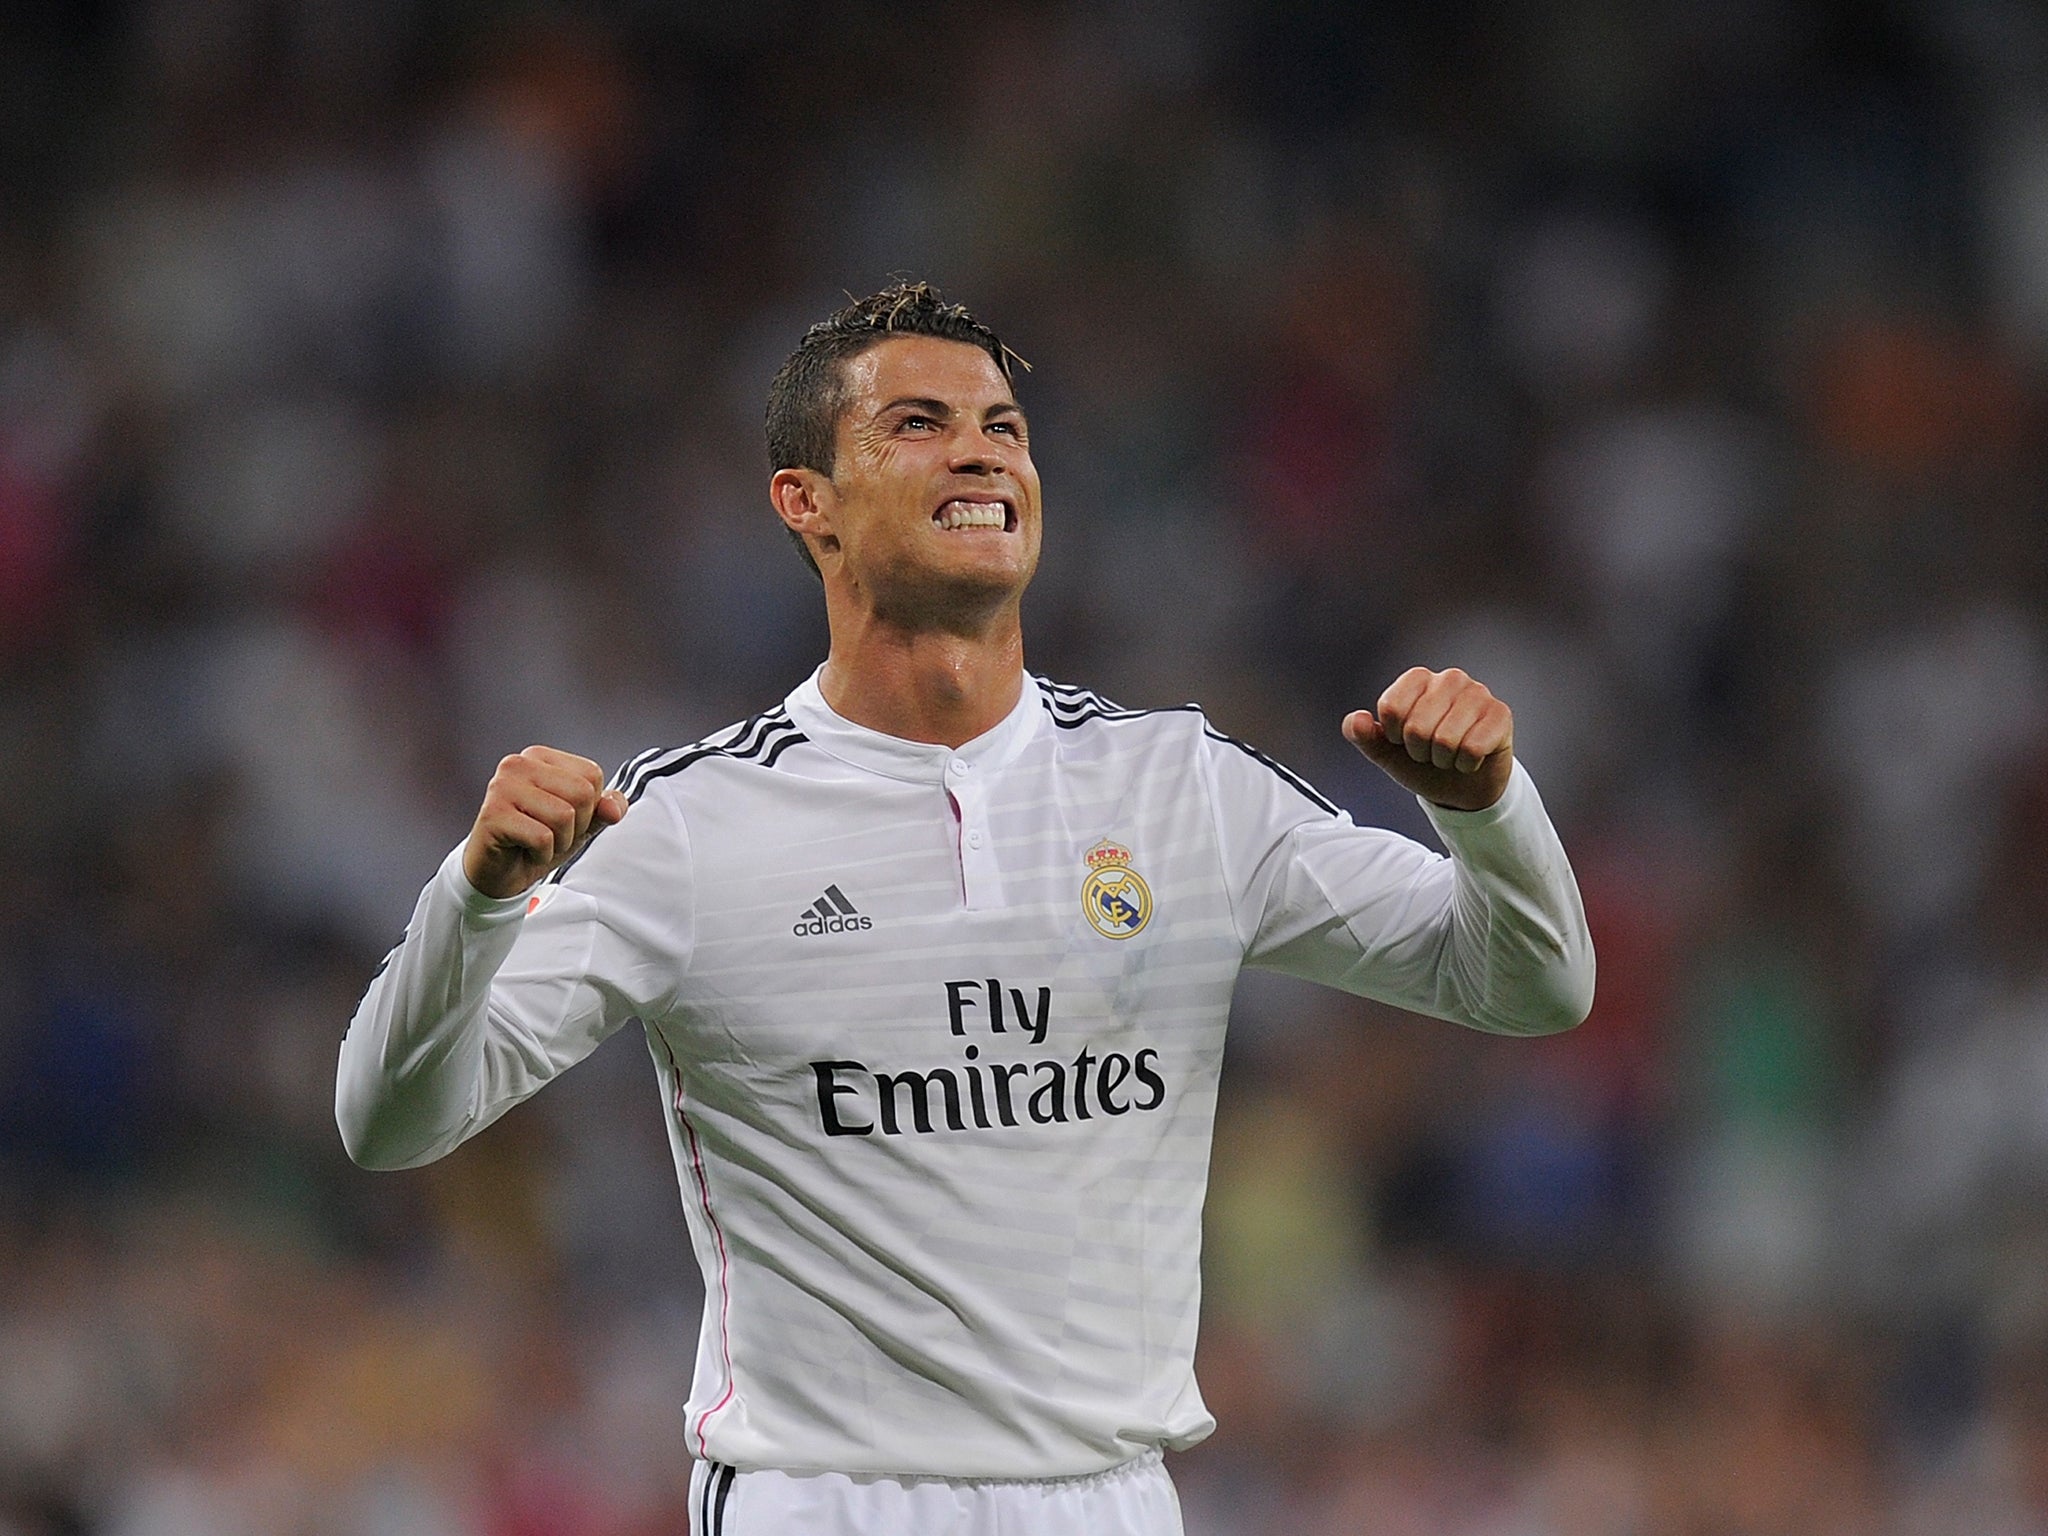 Cristiano Ronaldo is one of the most 'liked' footballers on Facebook